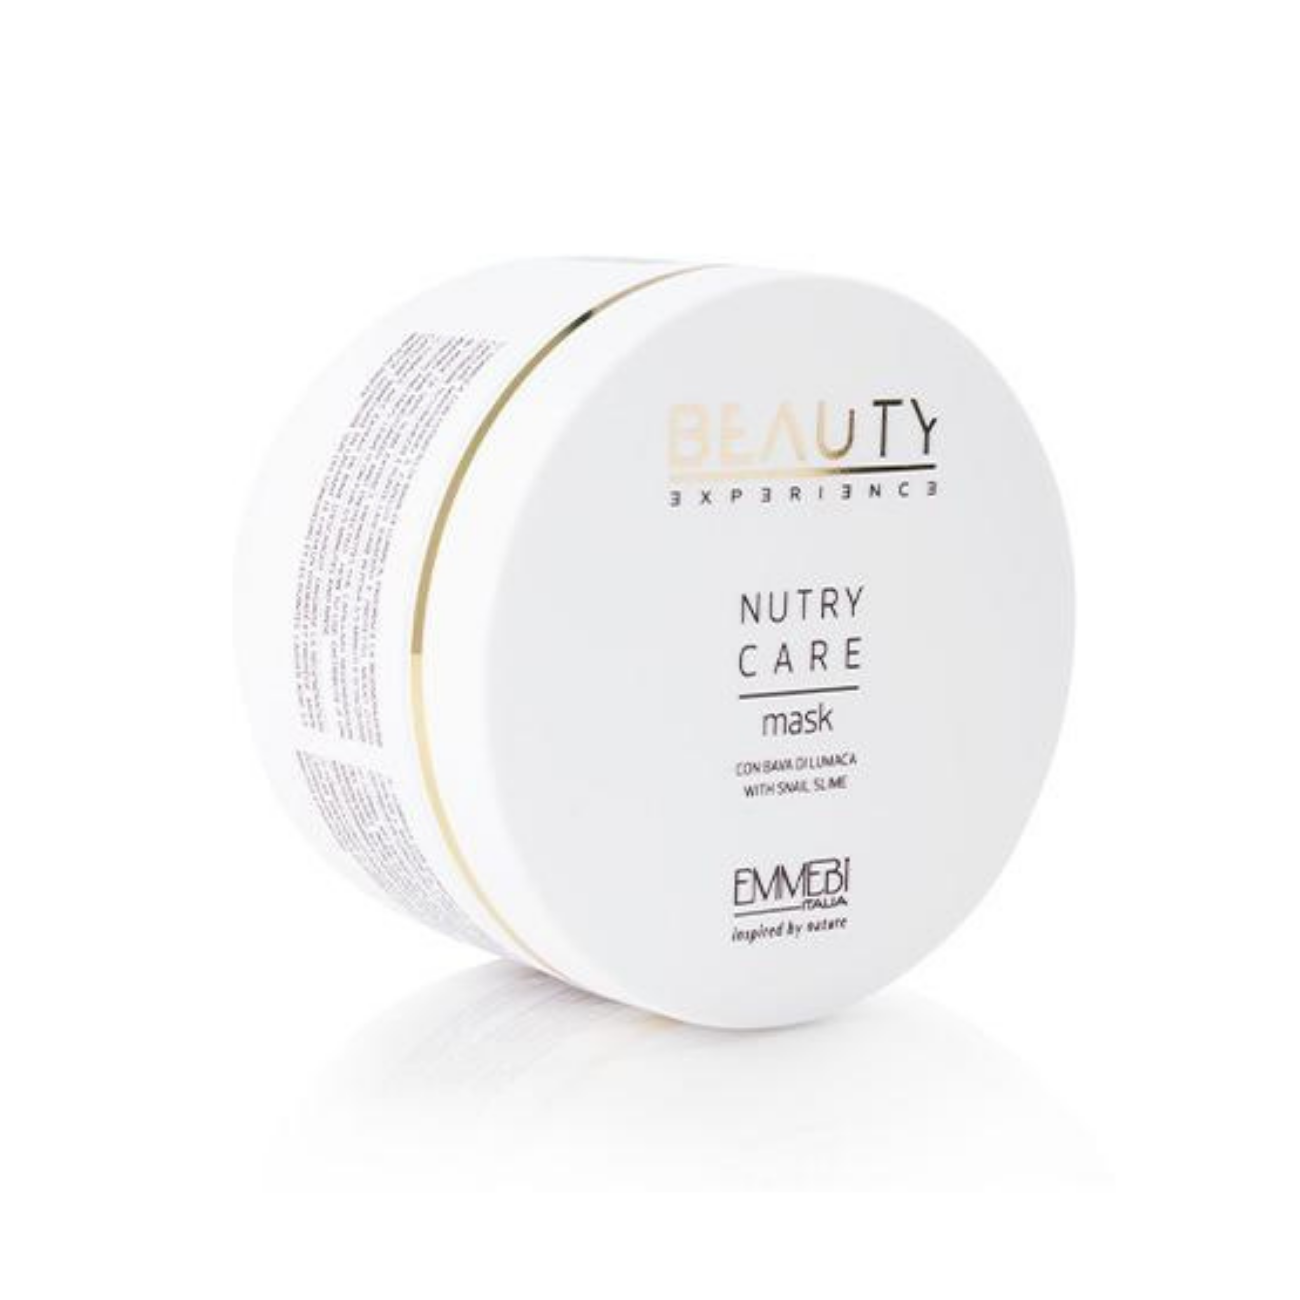 Nutry Care Mask - Regenerating hair mask with Vitamin E and Silk Proteins - 500 ml